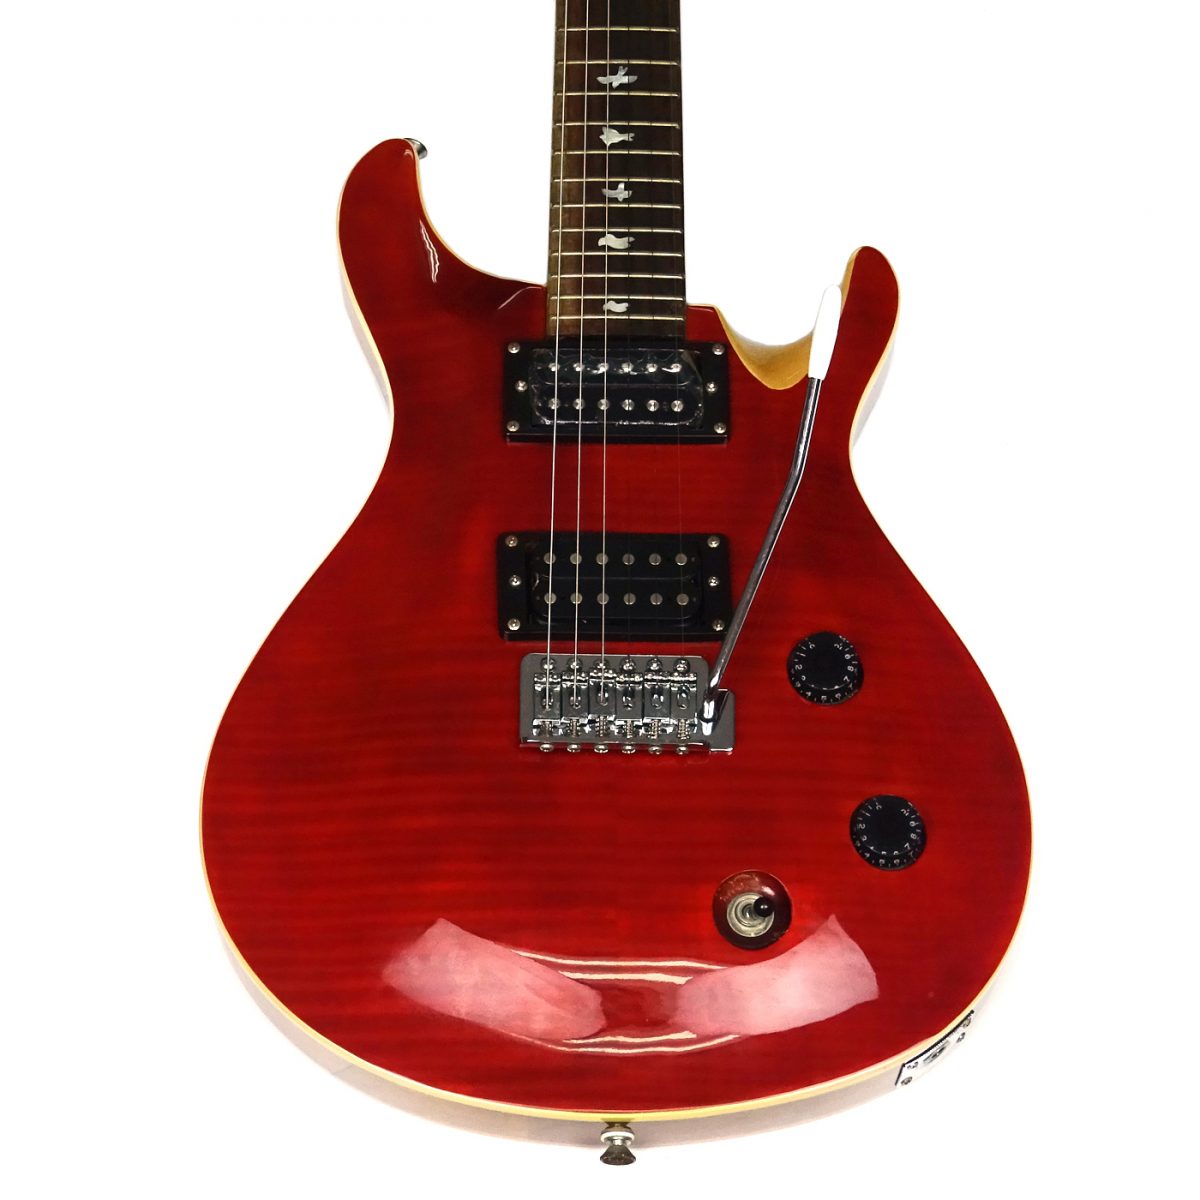 Paramount EGT240 Body (Fire Red Burst Color)